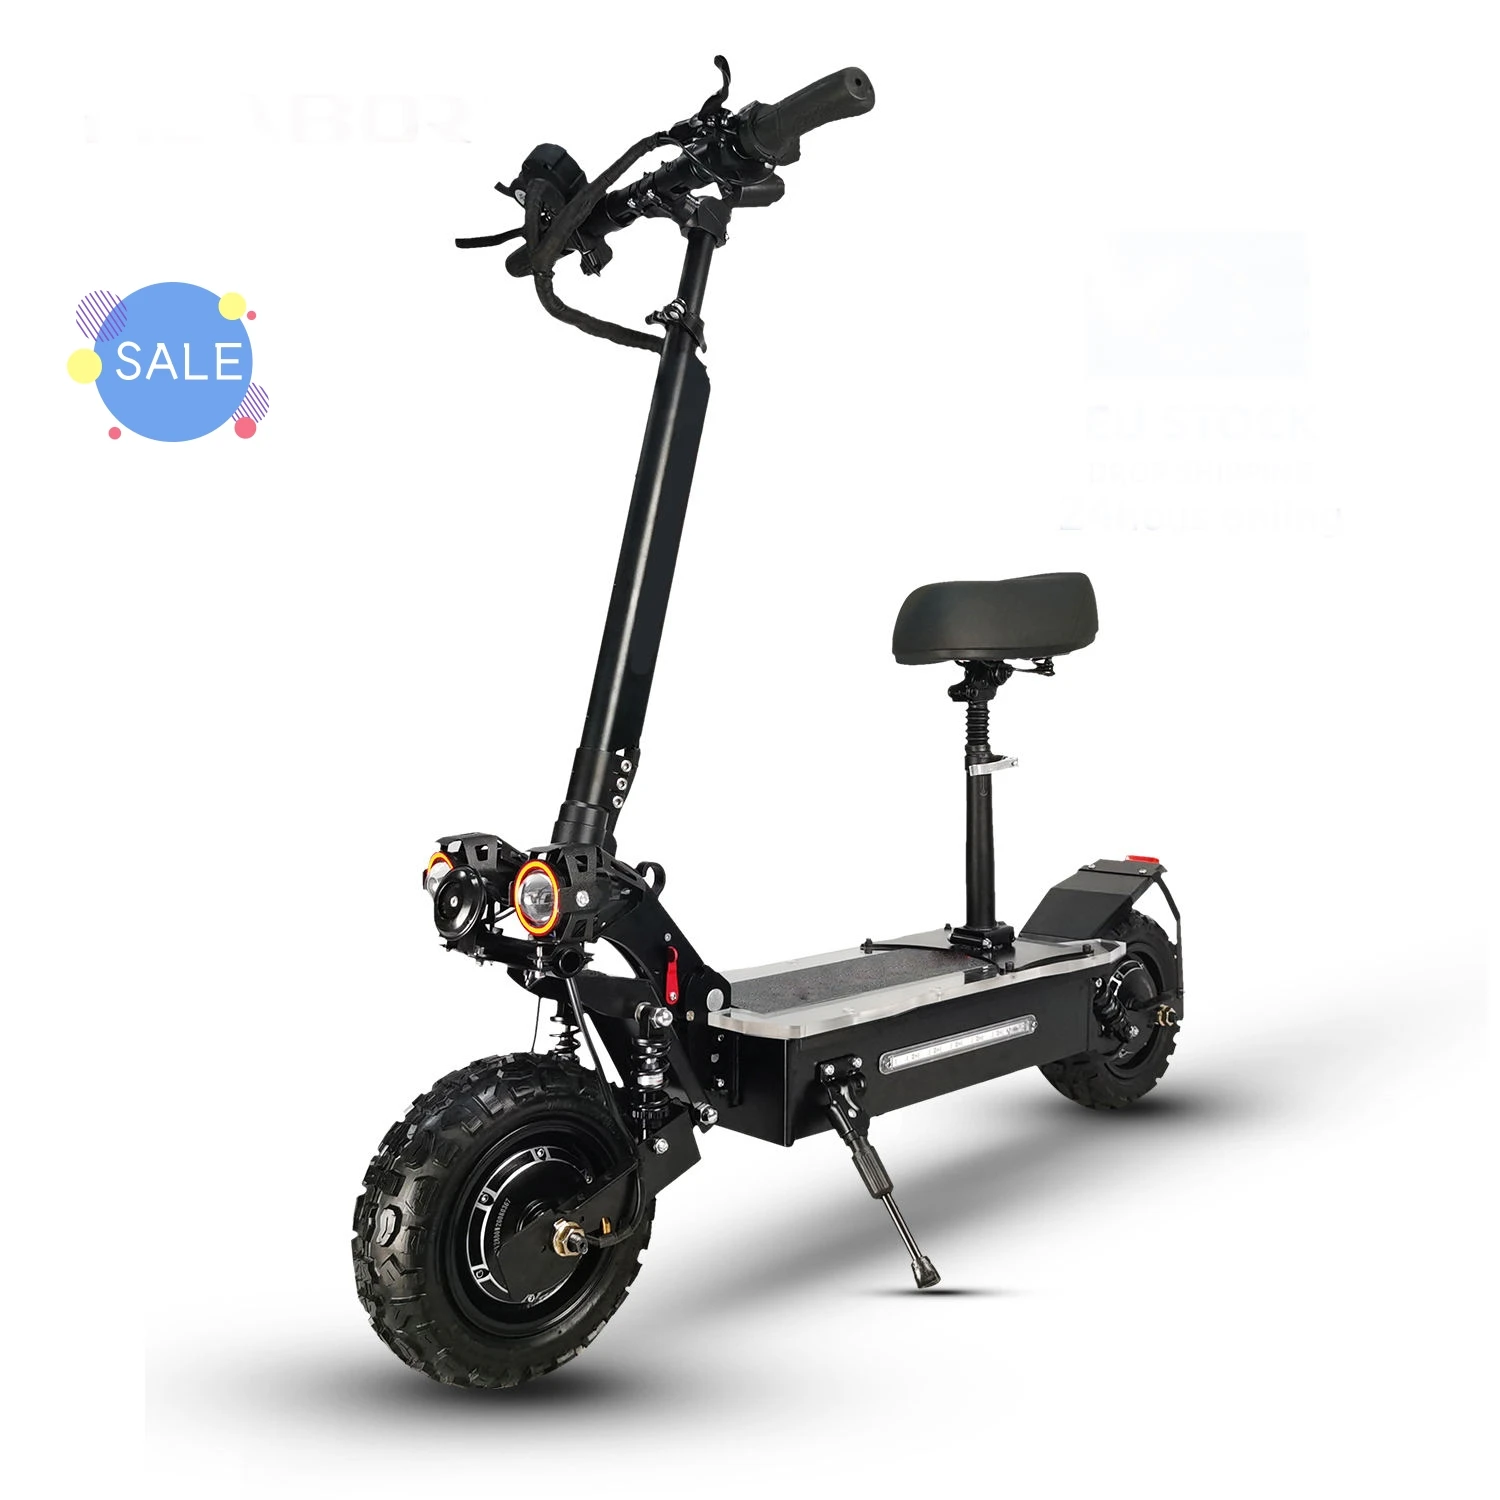 

Portable foldable 11 inch off road tires long range 60-80km 27ah 60v double motor scooter electric 5600w with seat for adults